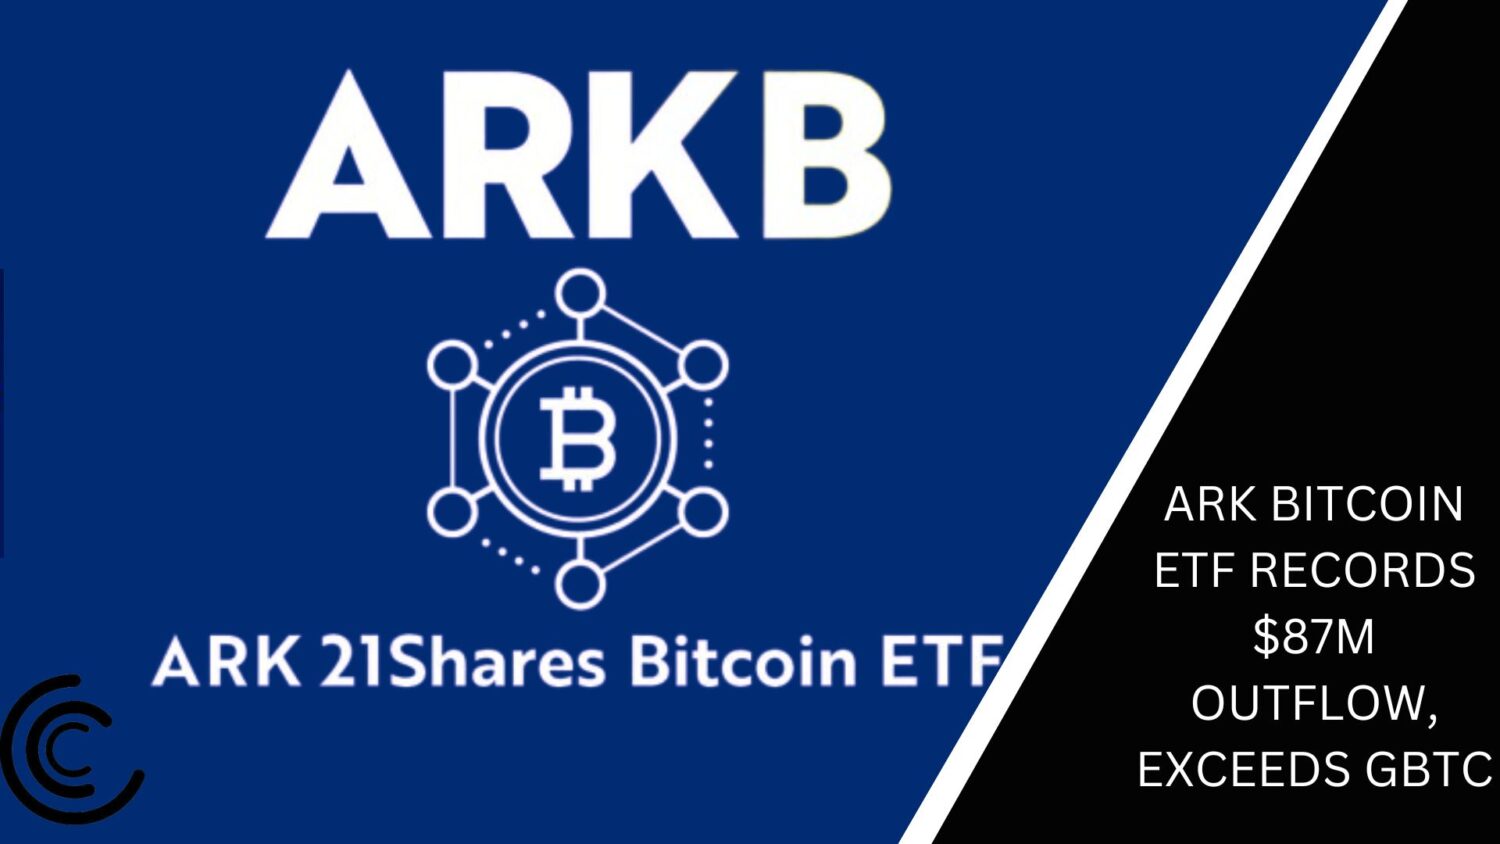 Ark Bitcoin Etf Records $87M Outflow, Exceeds Gbtc